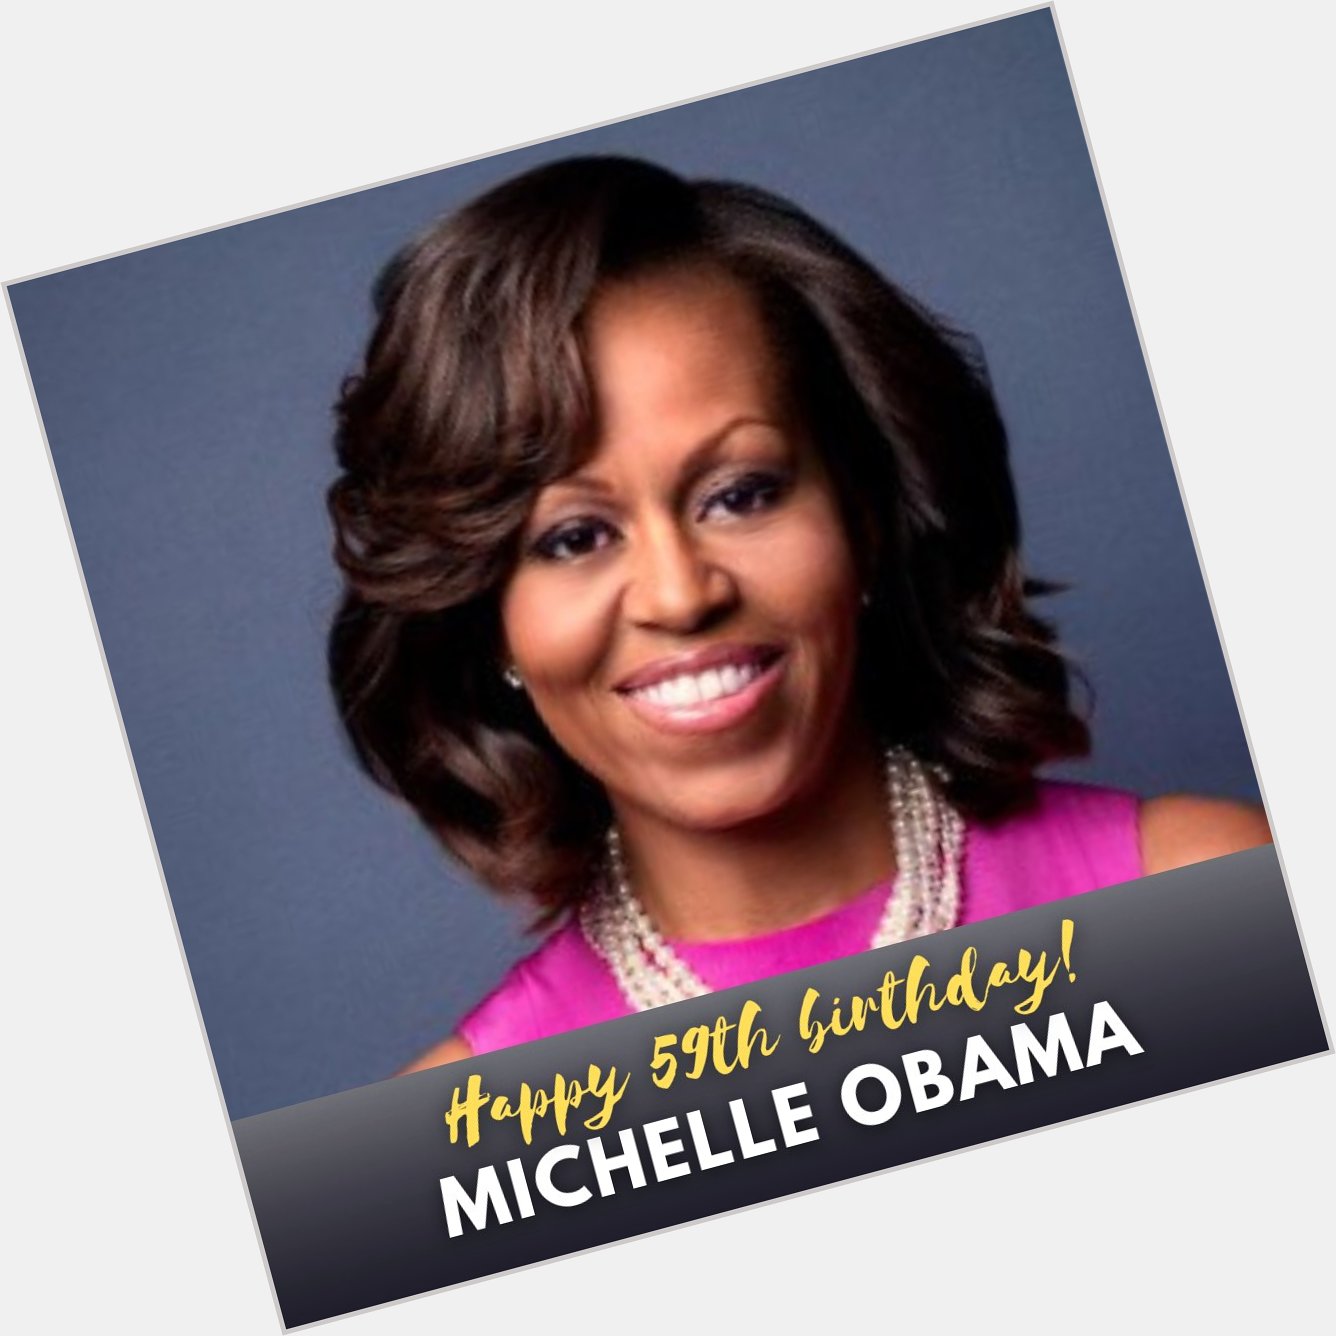 Happy birthday to Michelle Obama, who turns 59 today! 